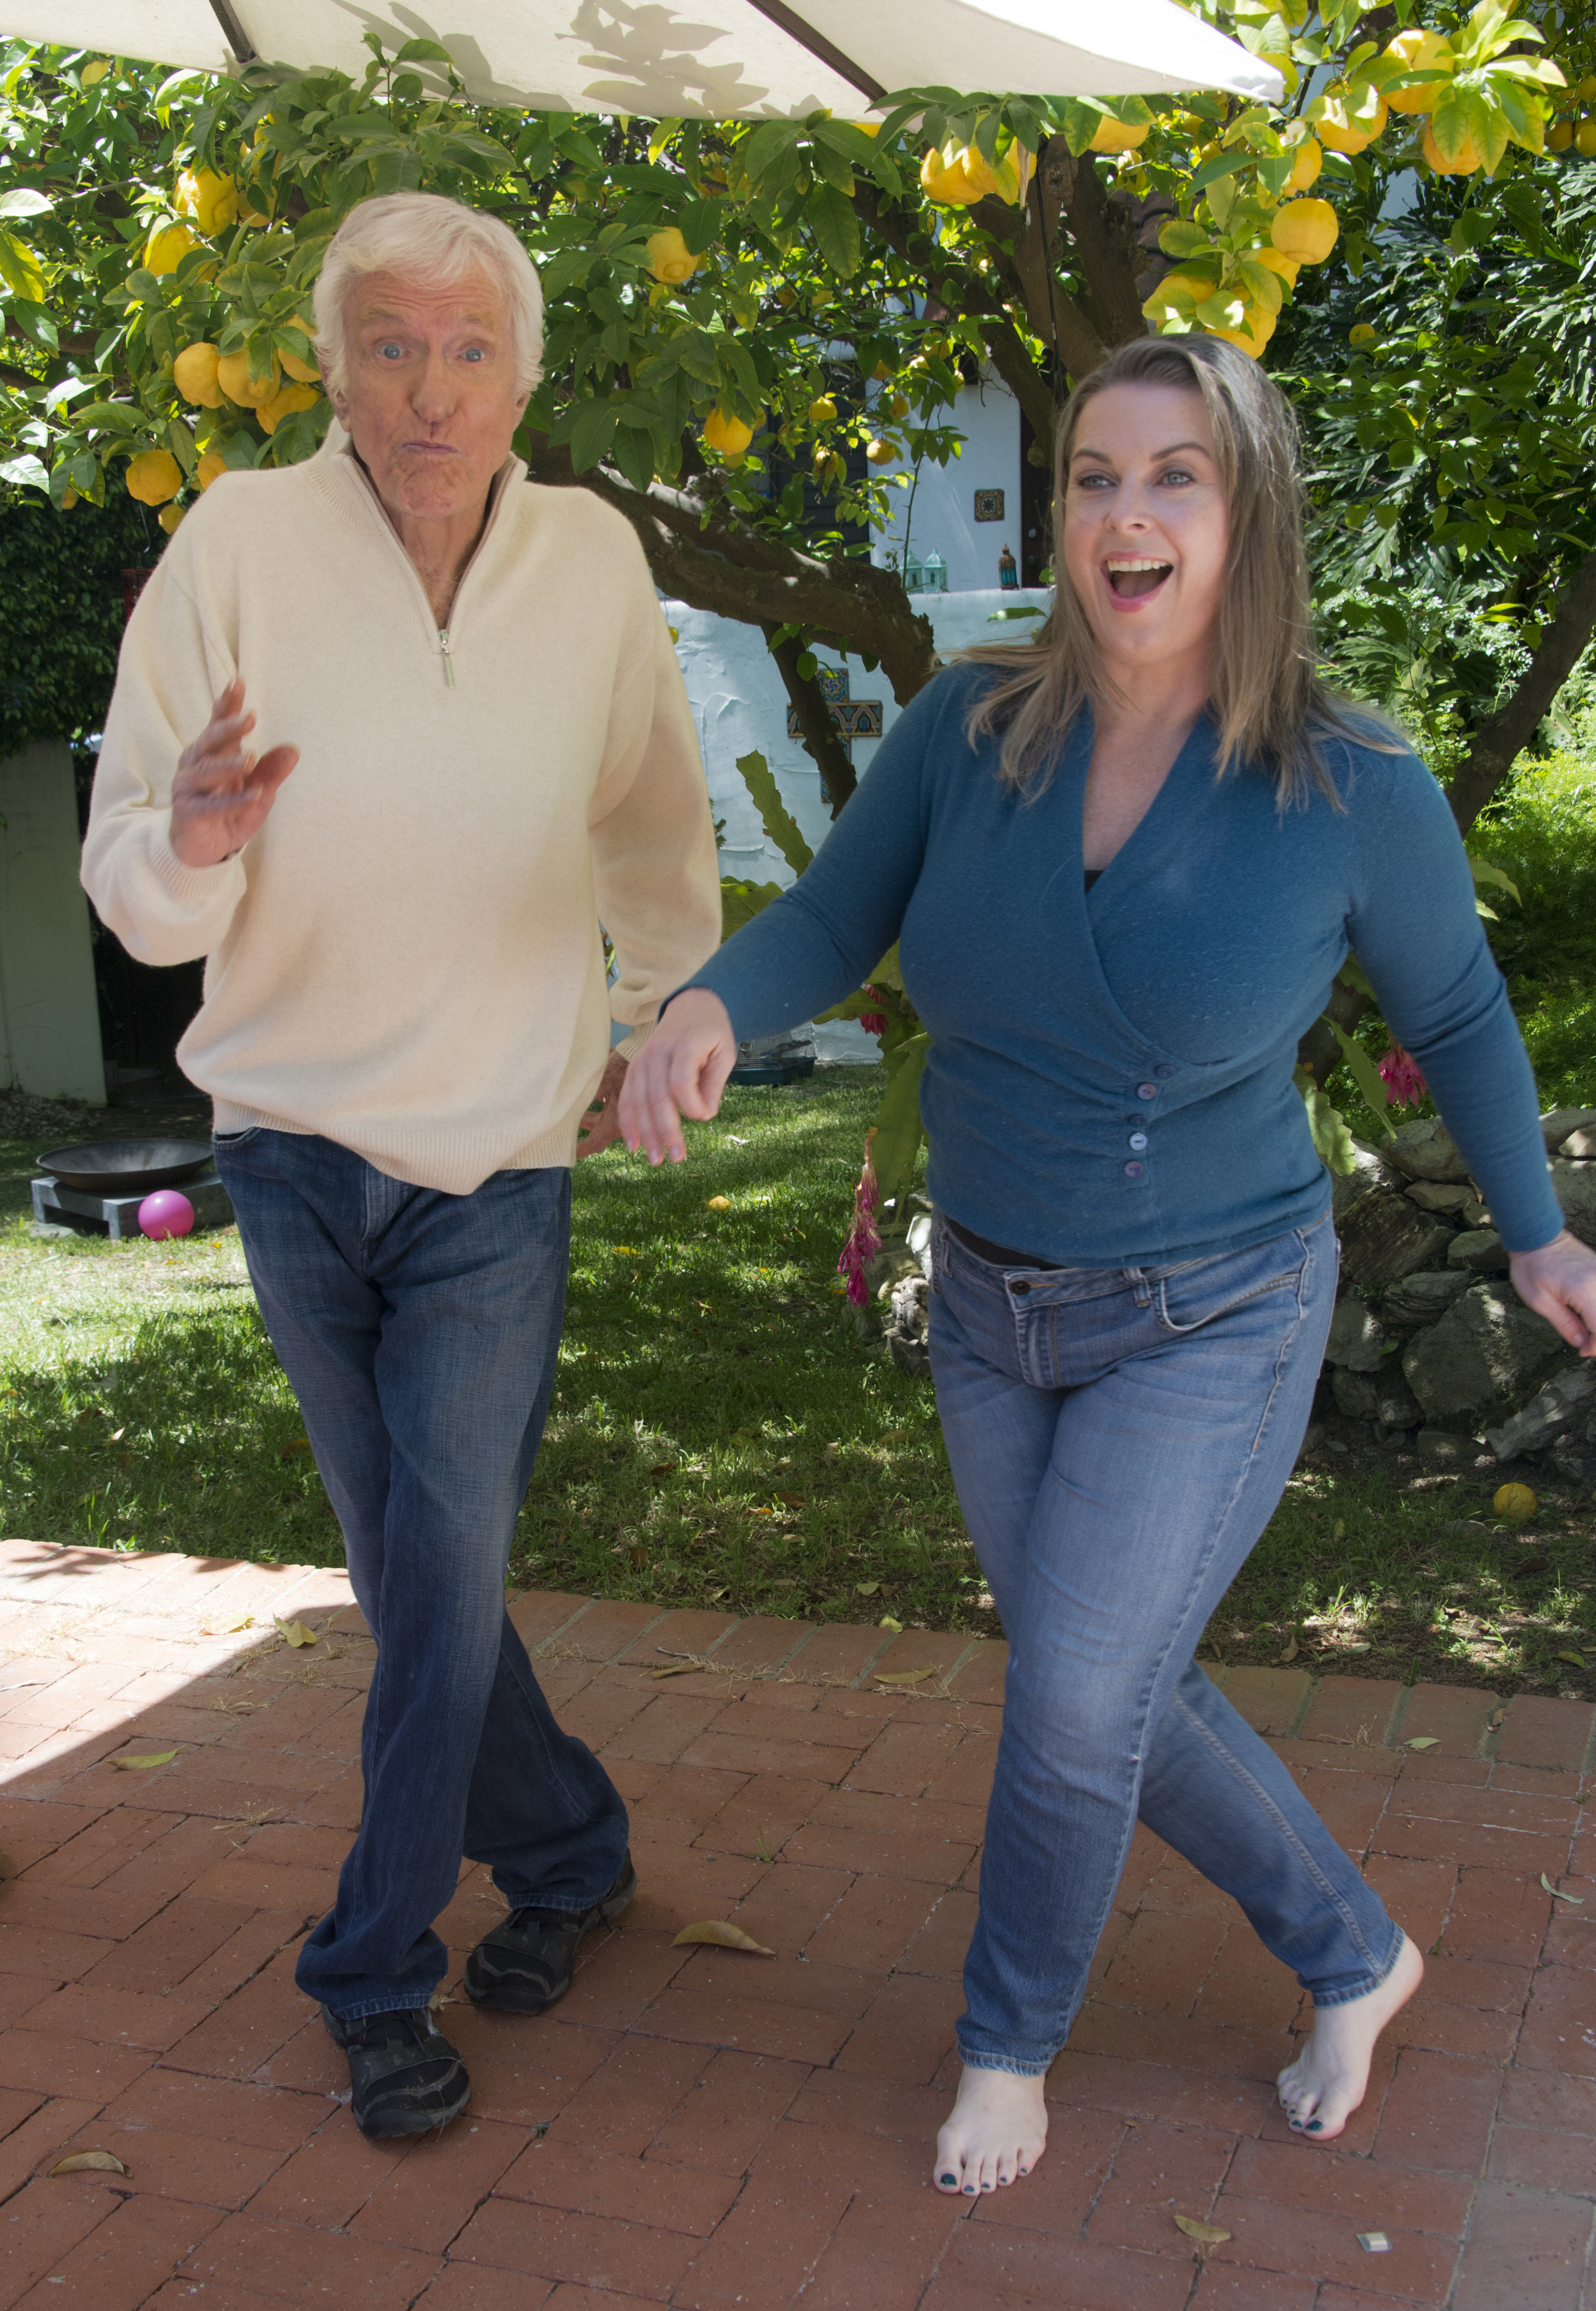 Dick Van Dyke and Arlene Silver during a home photoshoot in Malibu, 2016. | Source: Getty Images